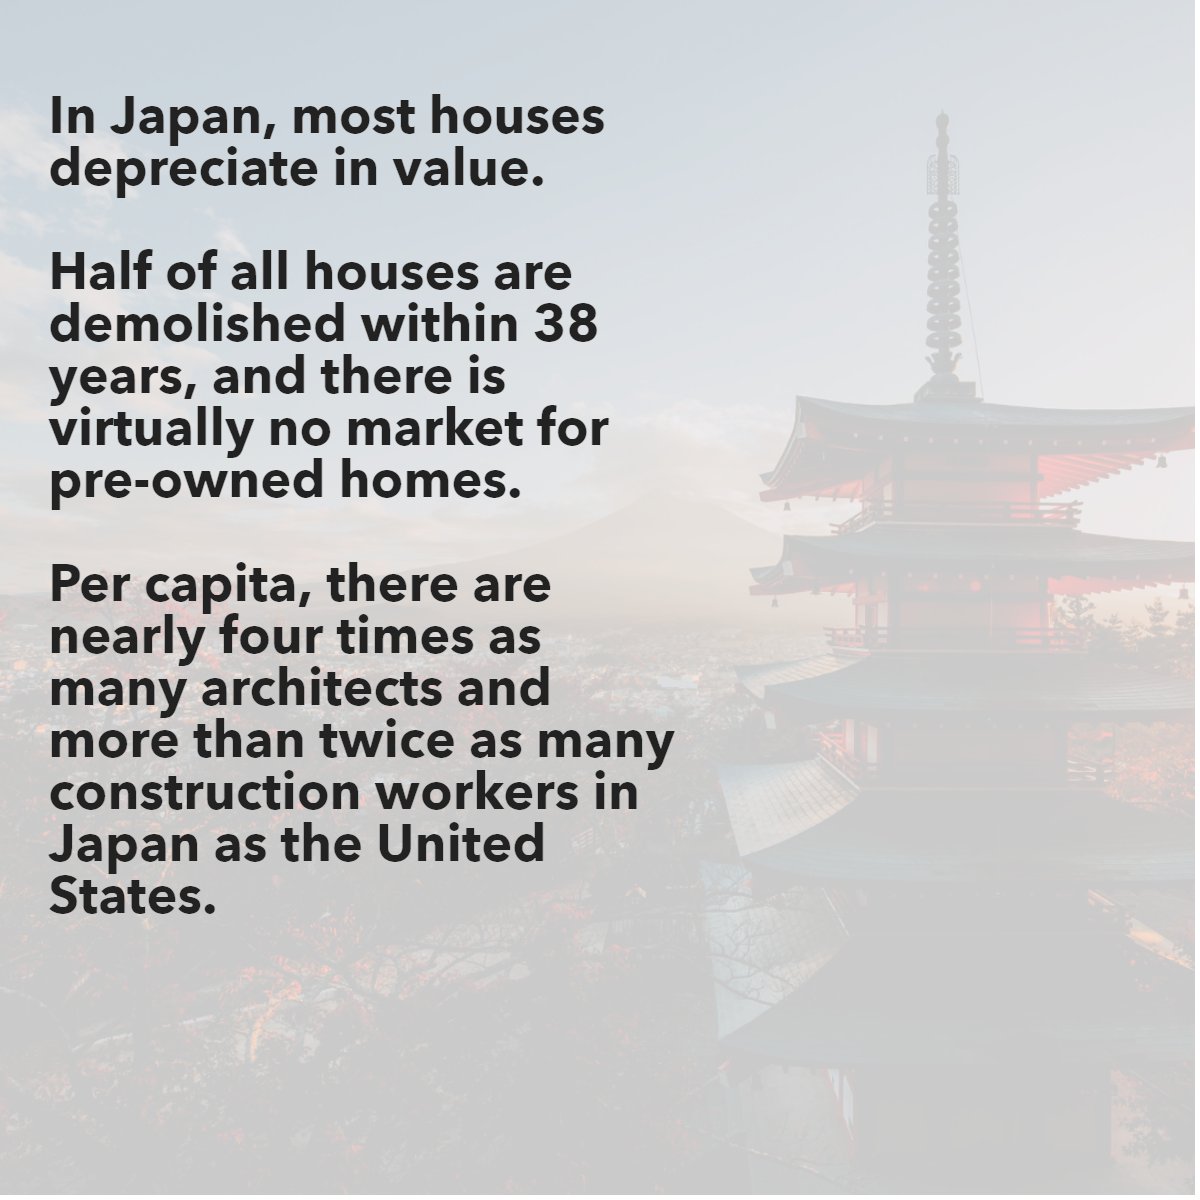 There are many interesting facts about real estate in countries abroad. 

Did you know this one? 🤔

#Japan    #Realestate    #dailyfact    #fact
#realtynewengland #mannymenezesgroup #realtyne #wesellnewengland #welovenewengland #ilovenewengland #massrealestate